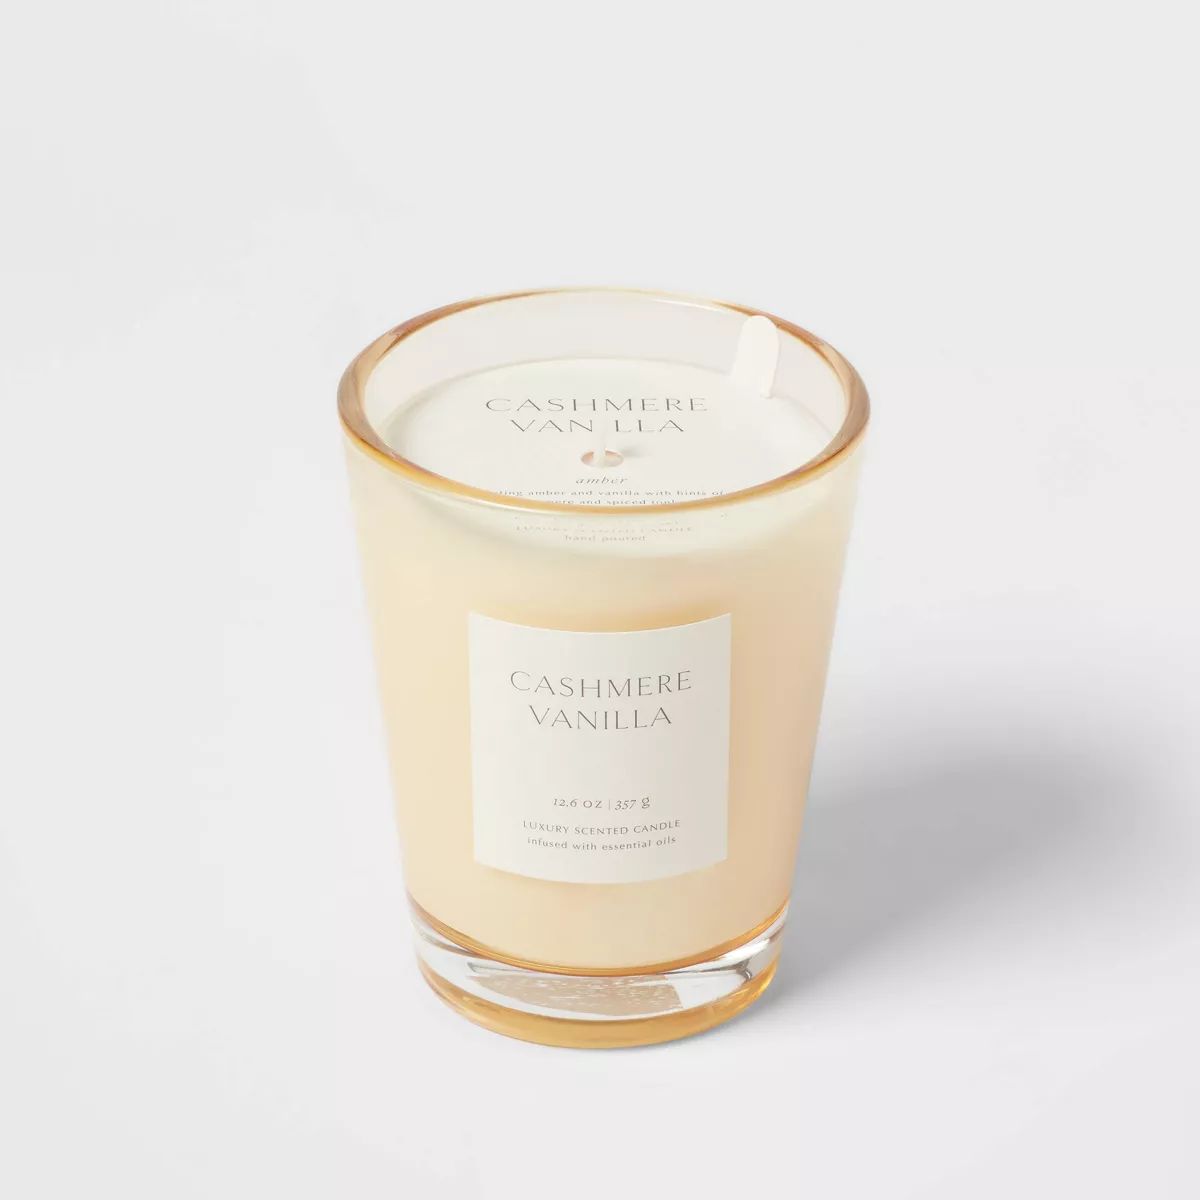 Colored Vase Glass with Dustcover Cashmere Vanilla Candle Ivory - Threshold™ | Target